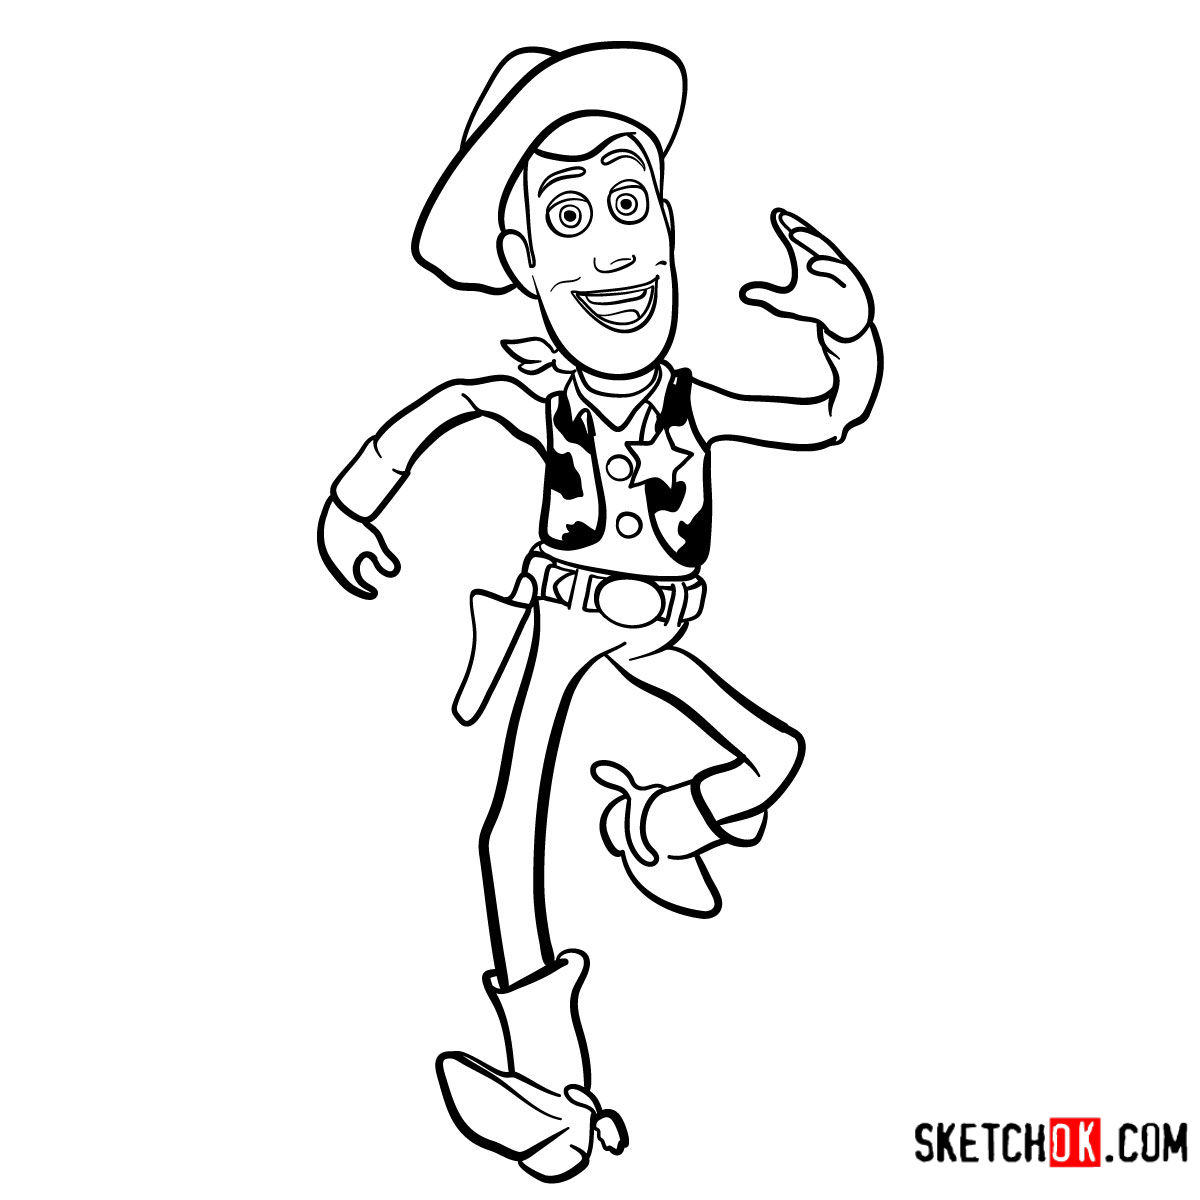 Toy Story Step By Step Drawing Tutorials